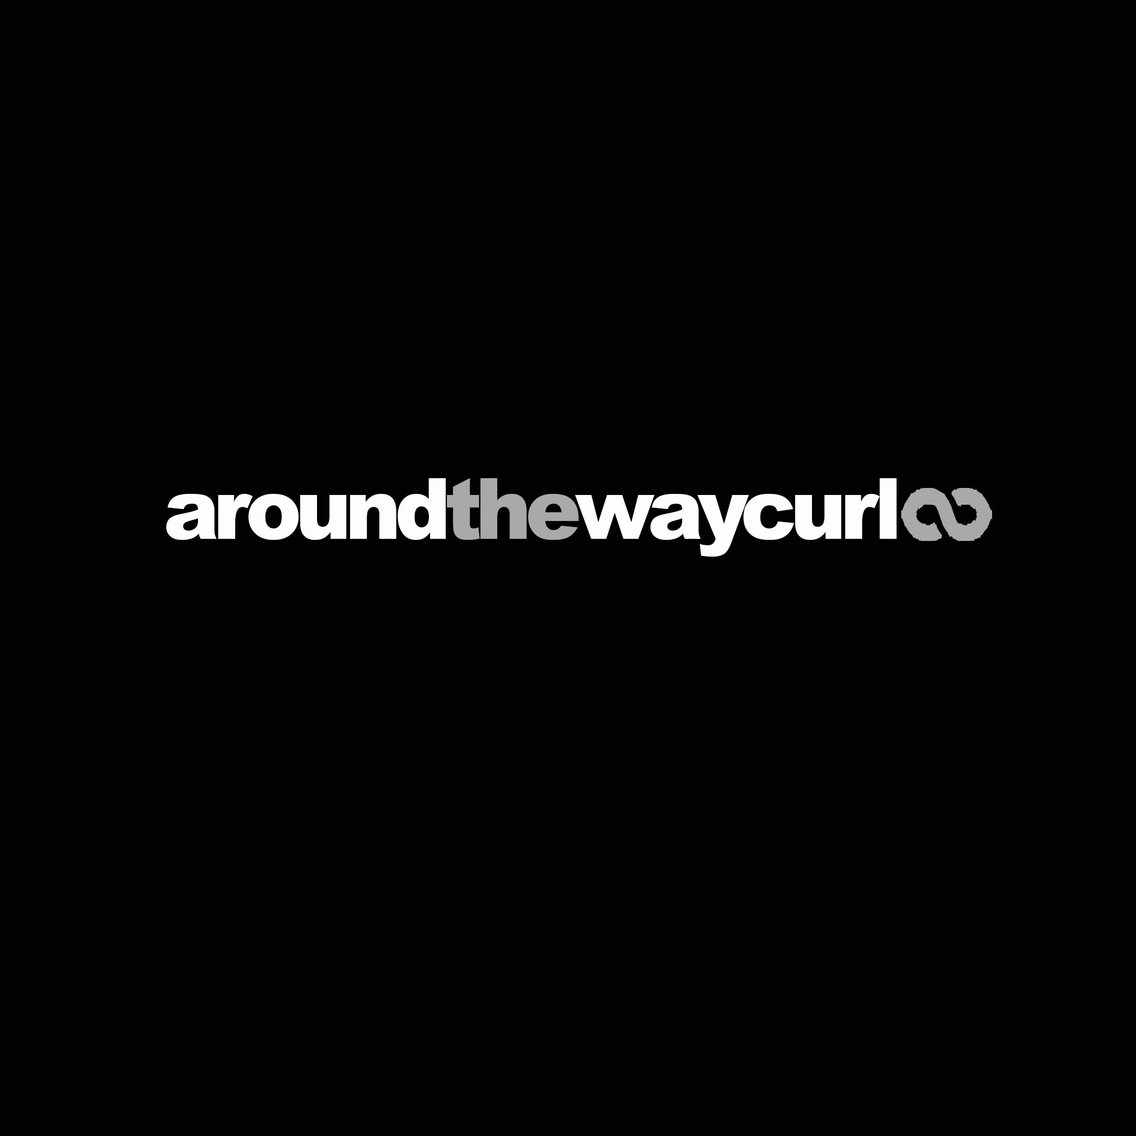 Around The Way Curls - Cover Image